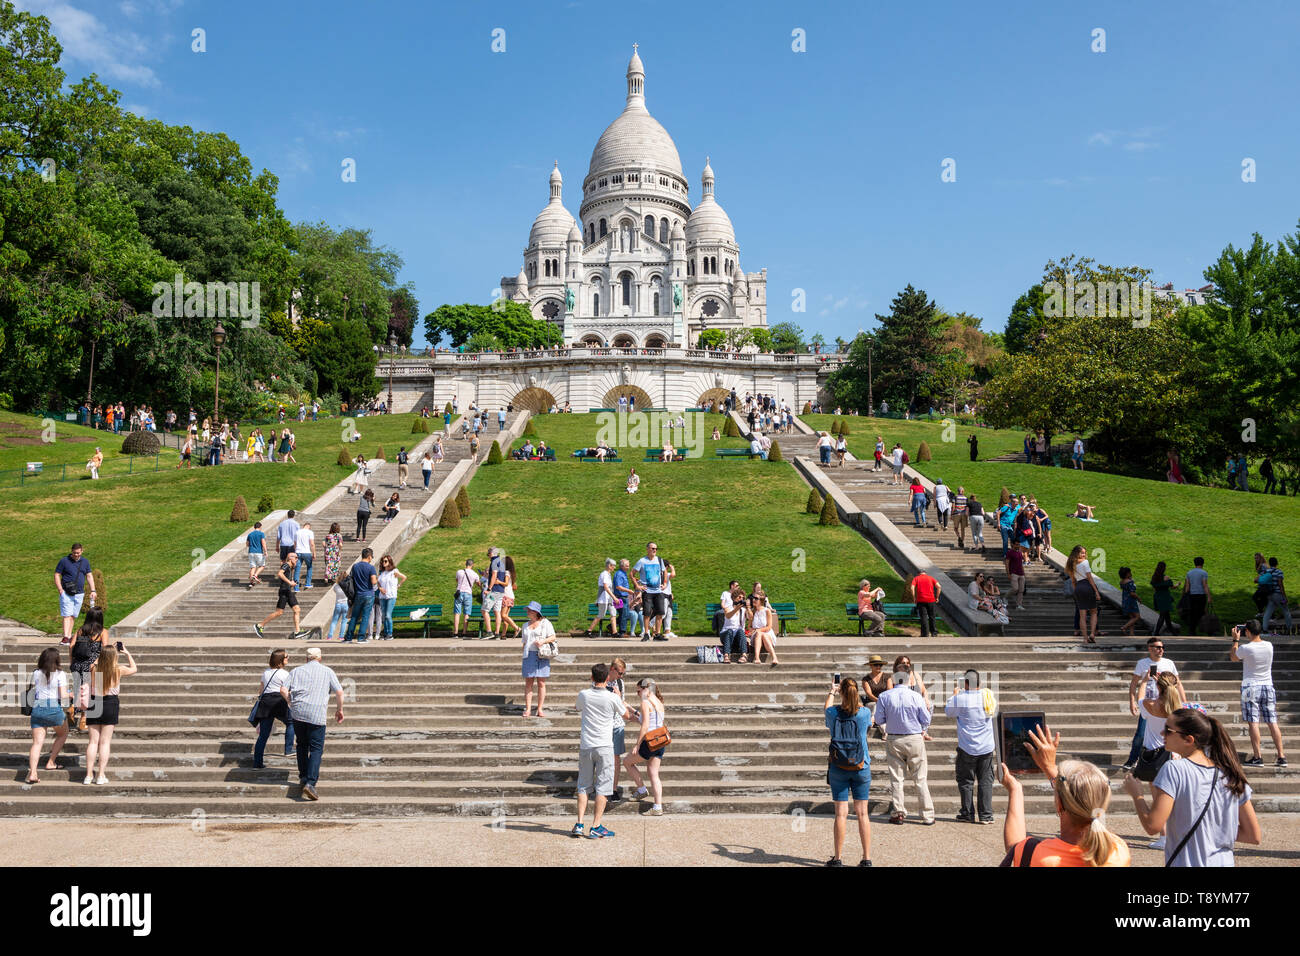 View of Sacre-Coeur Basilica and Square Louise-Michel in Montmartre, Paris, France Stock Photo